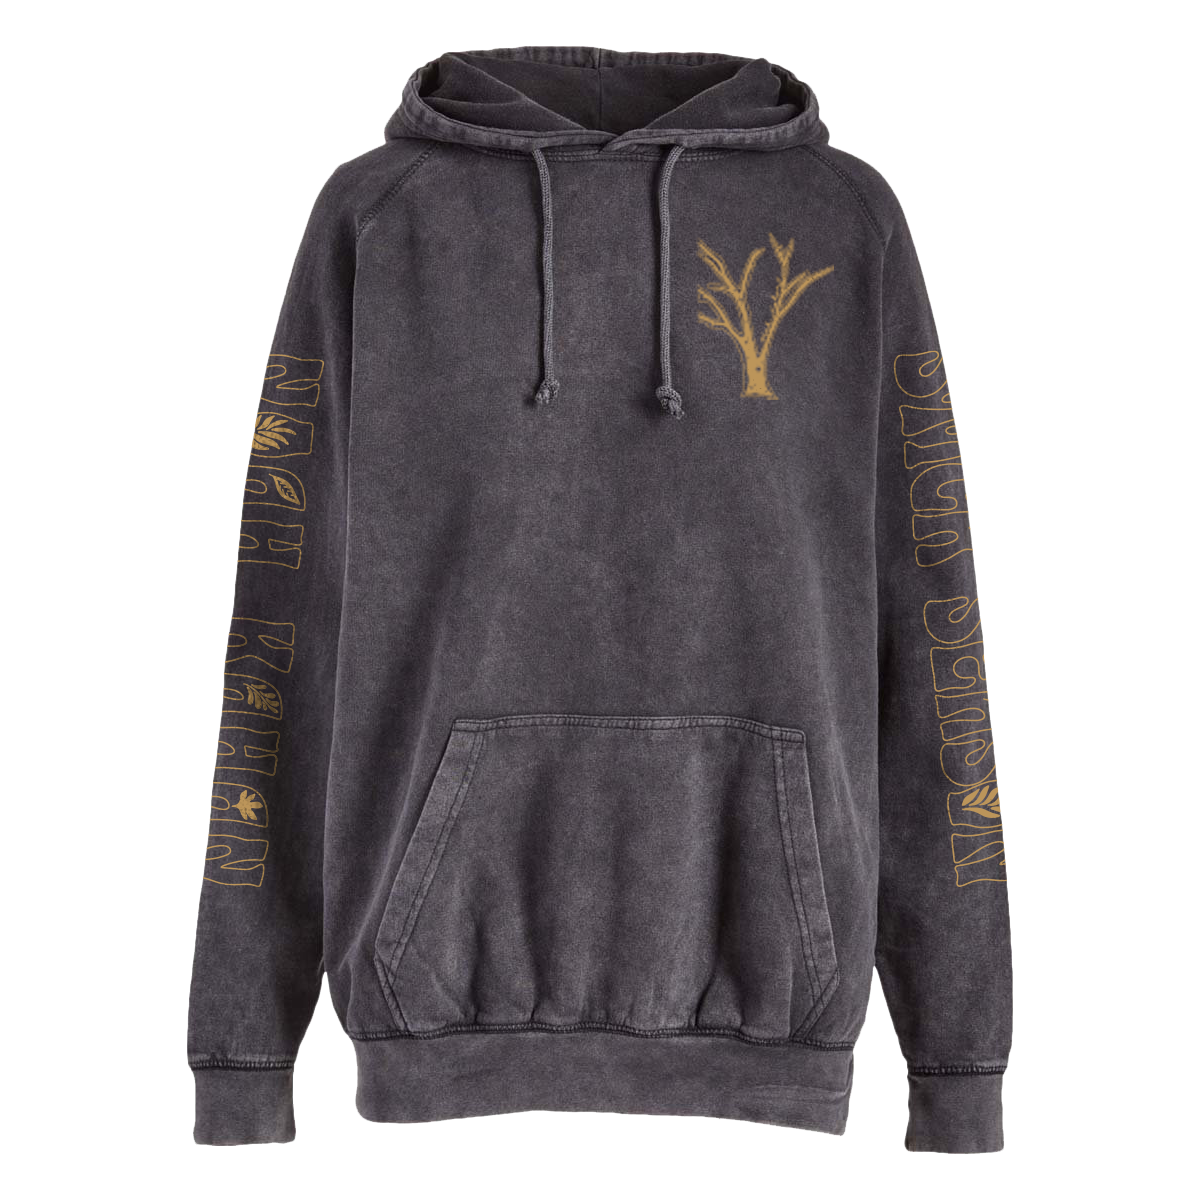 the official Noah Kahan Stick Season Hoodie in vintage black mineral wash. Oversize left chest tree branches on artwork front, and full length prints on each sleeve, all in gold metallic ink.